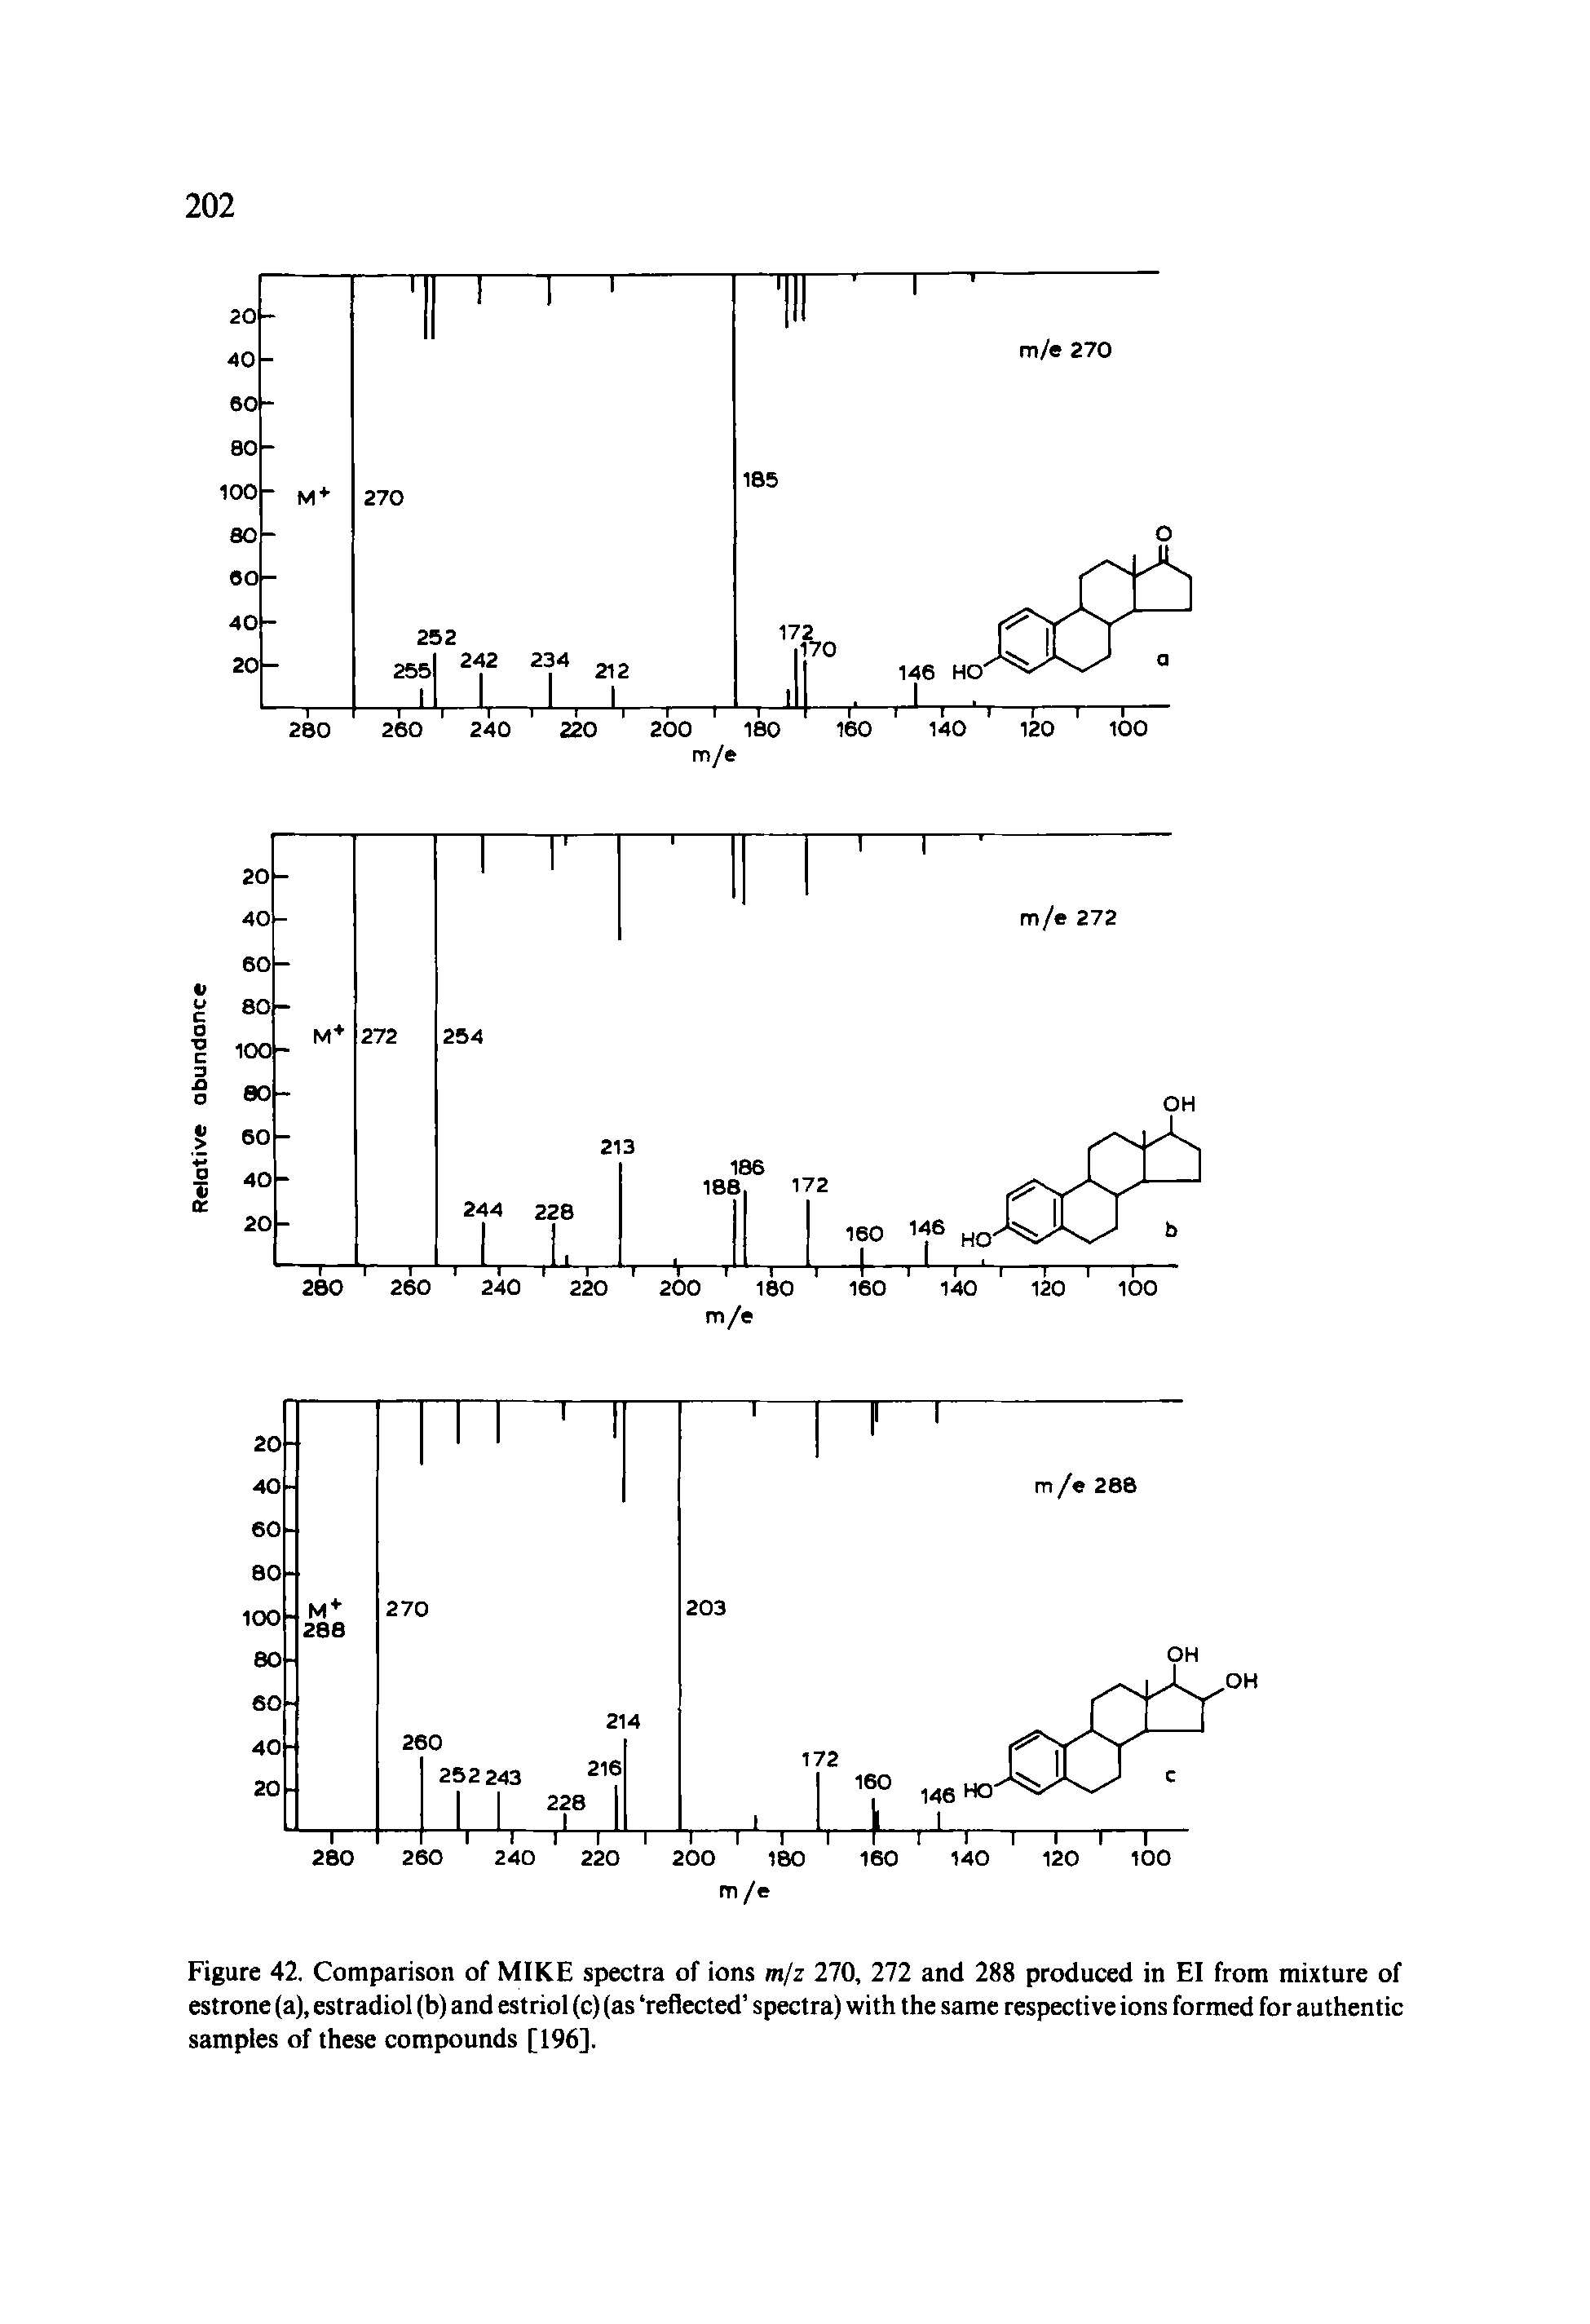 Figure 42. Comparison of MIKE spectra of ions m/z 270, 111 and 288 produced in El from mixture of estrone (a), estradiol (b) and estriol (c) (as reflected spectra) with the same respective ions formed for authentic samples of these compounds [196].